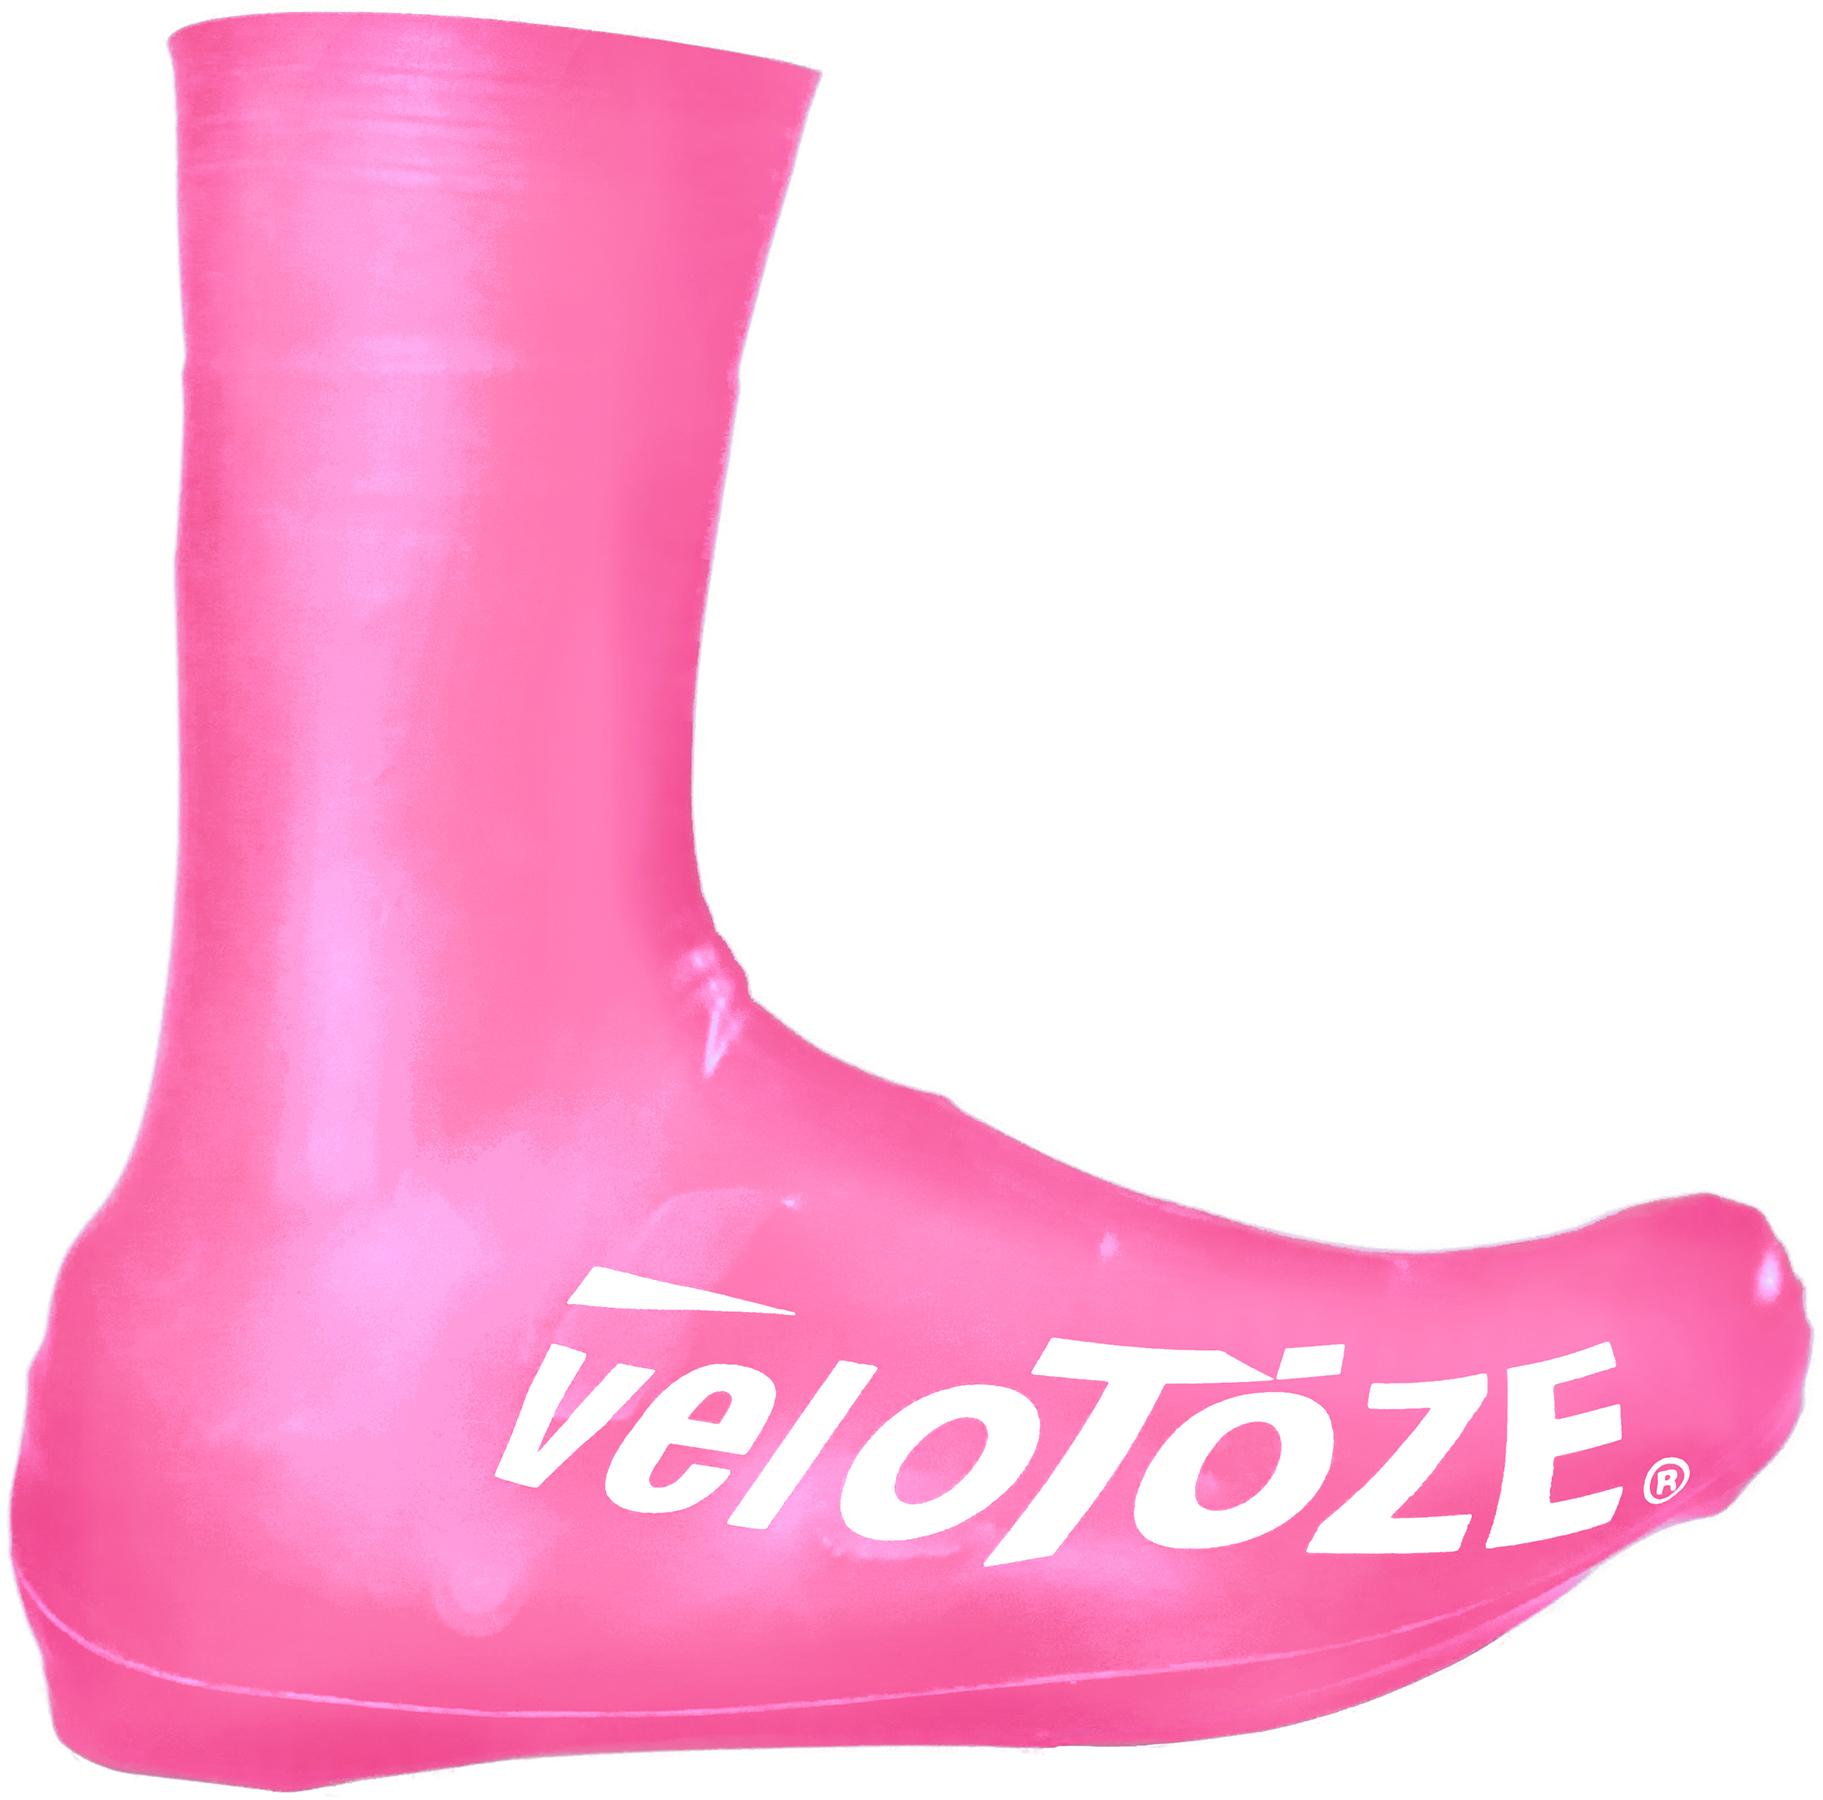 Velotoze Tall Shoe Covers 2.0  Pink